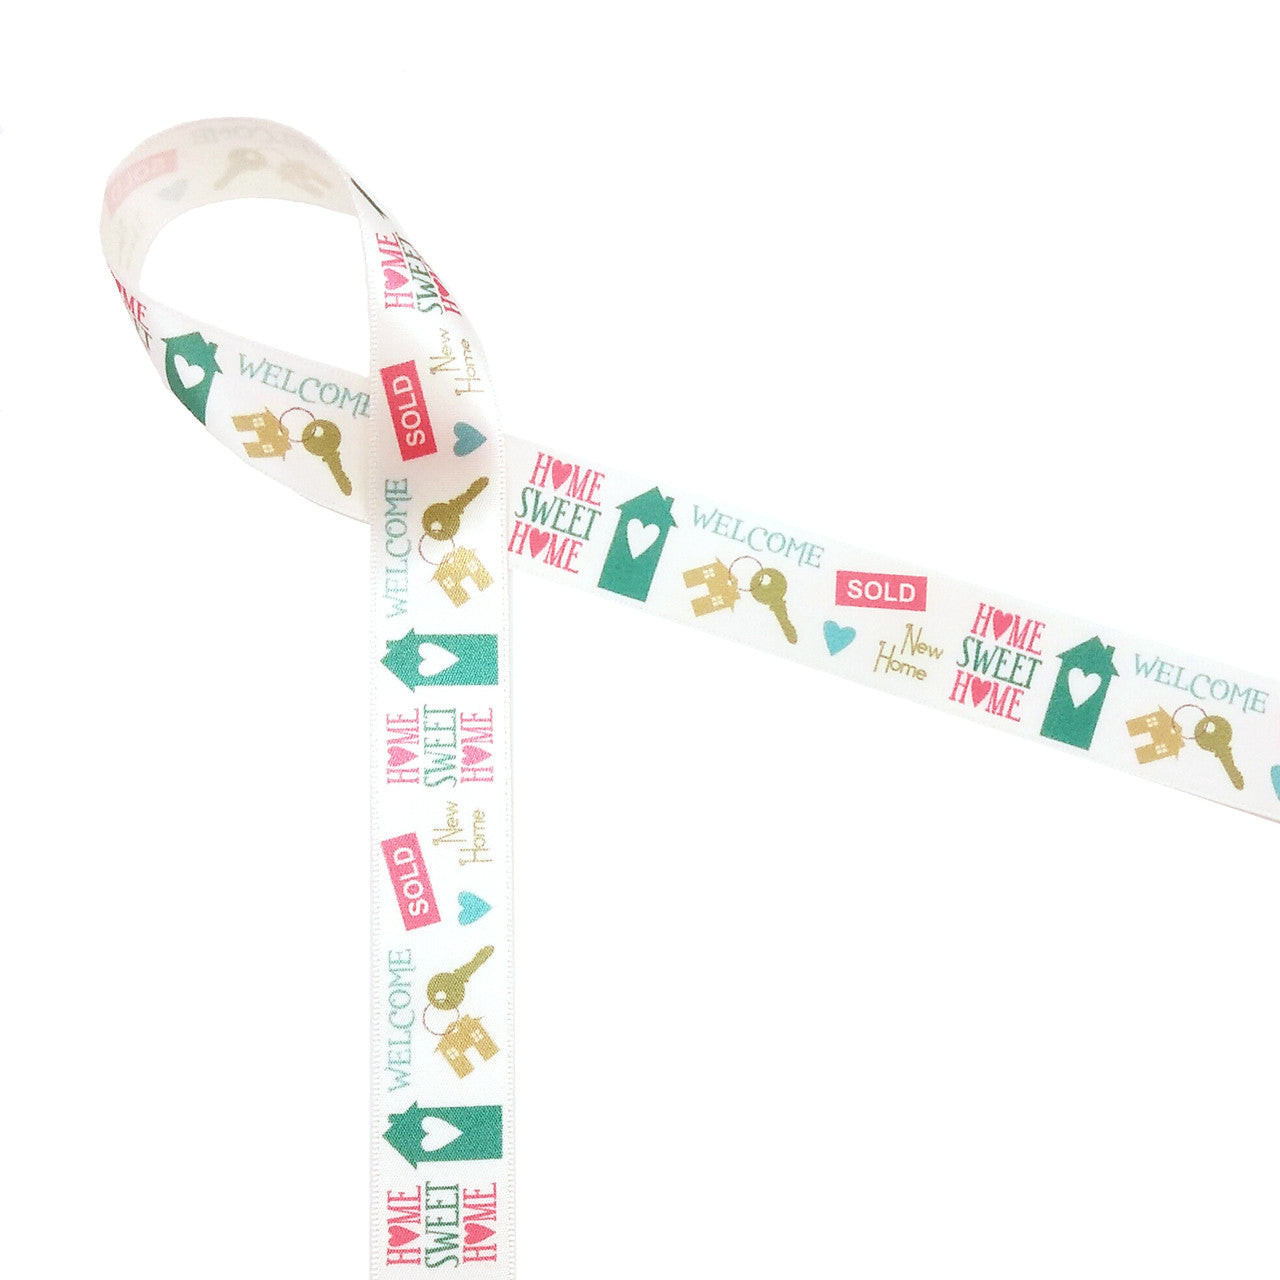 Welcome Home word block ribbon expresses all the sentiments of moving to a new place!